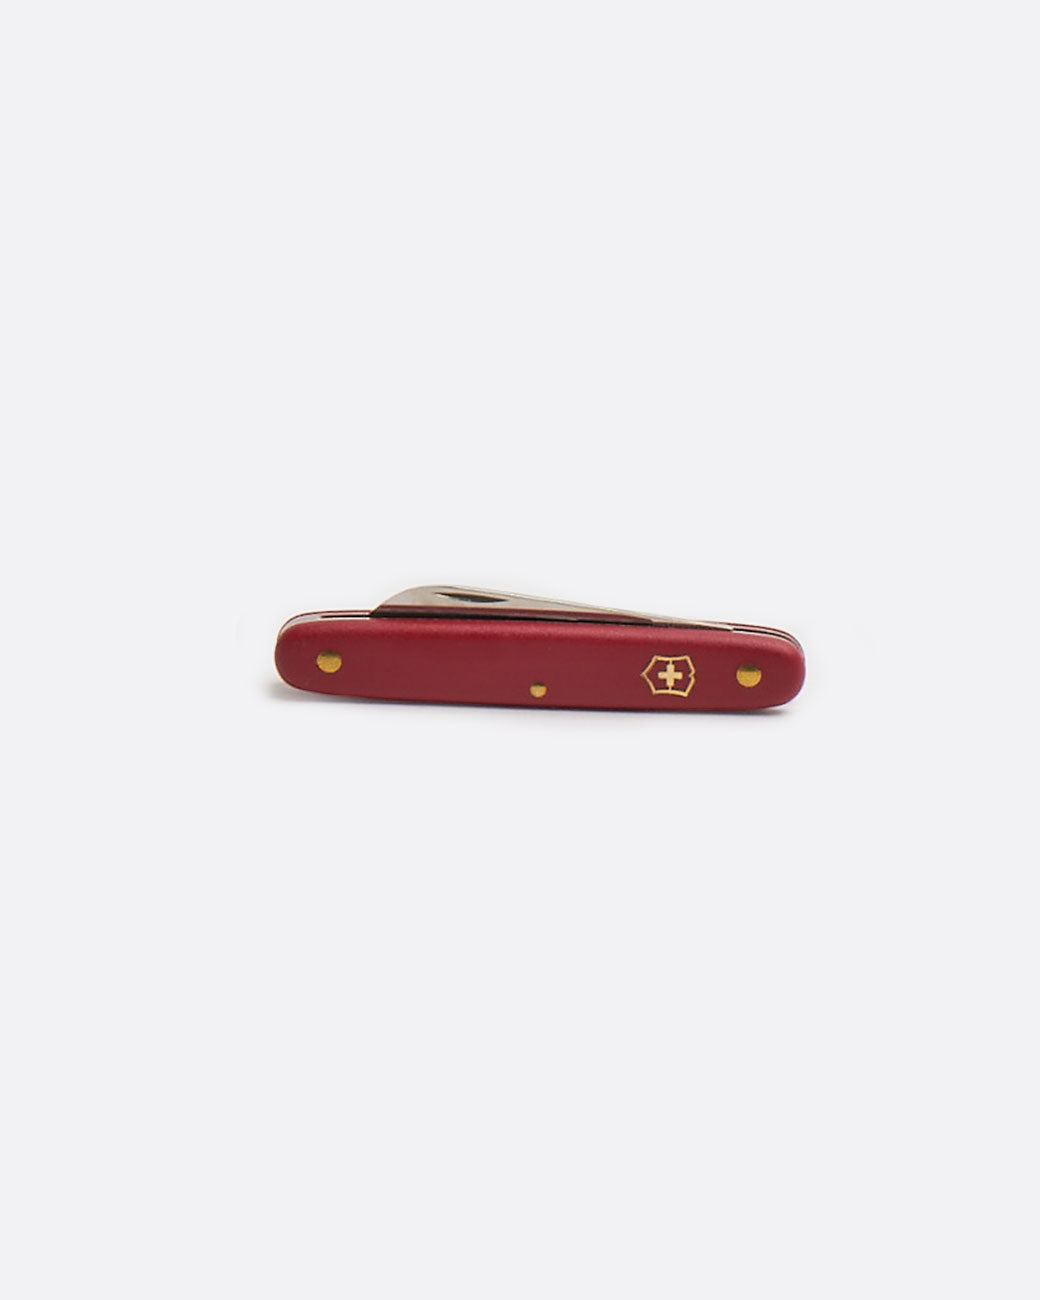 Victorinox floral knife with red handle, shown closed